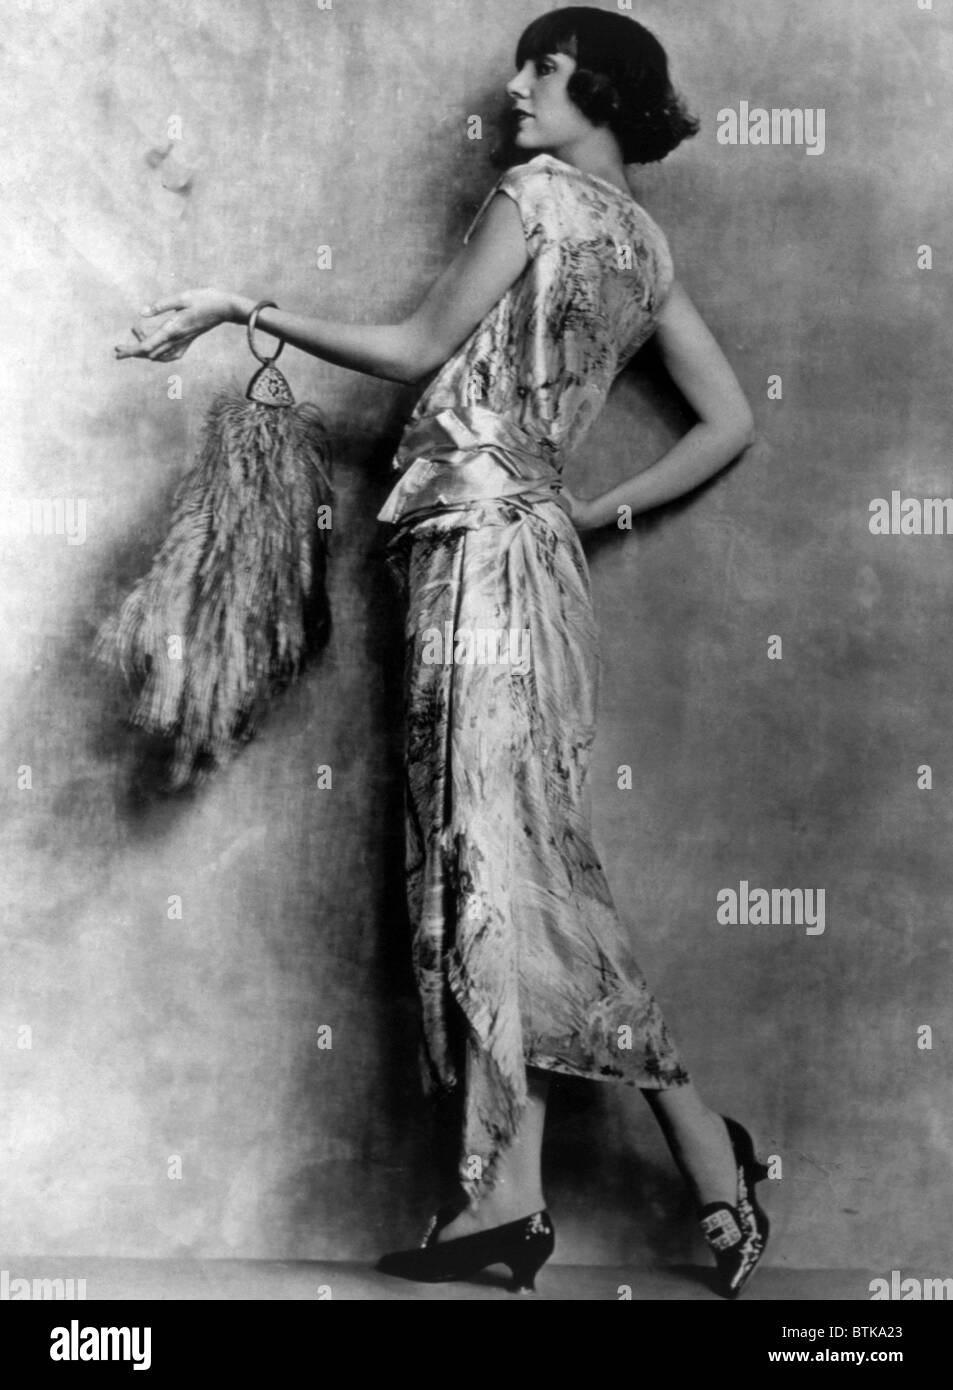 Evening gown of brocaded satin and feathered handbag, circa 1922. Photo: Courtesy Everett Collection Stock Photo